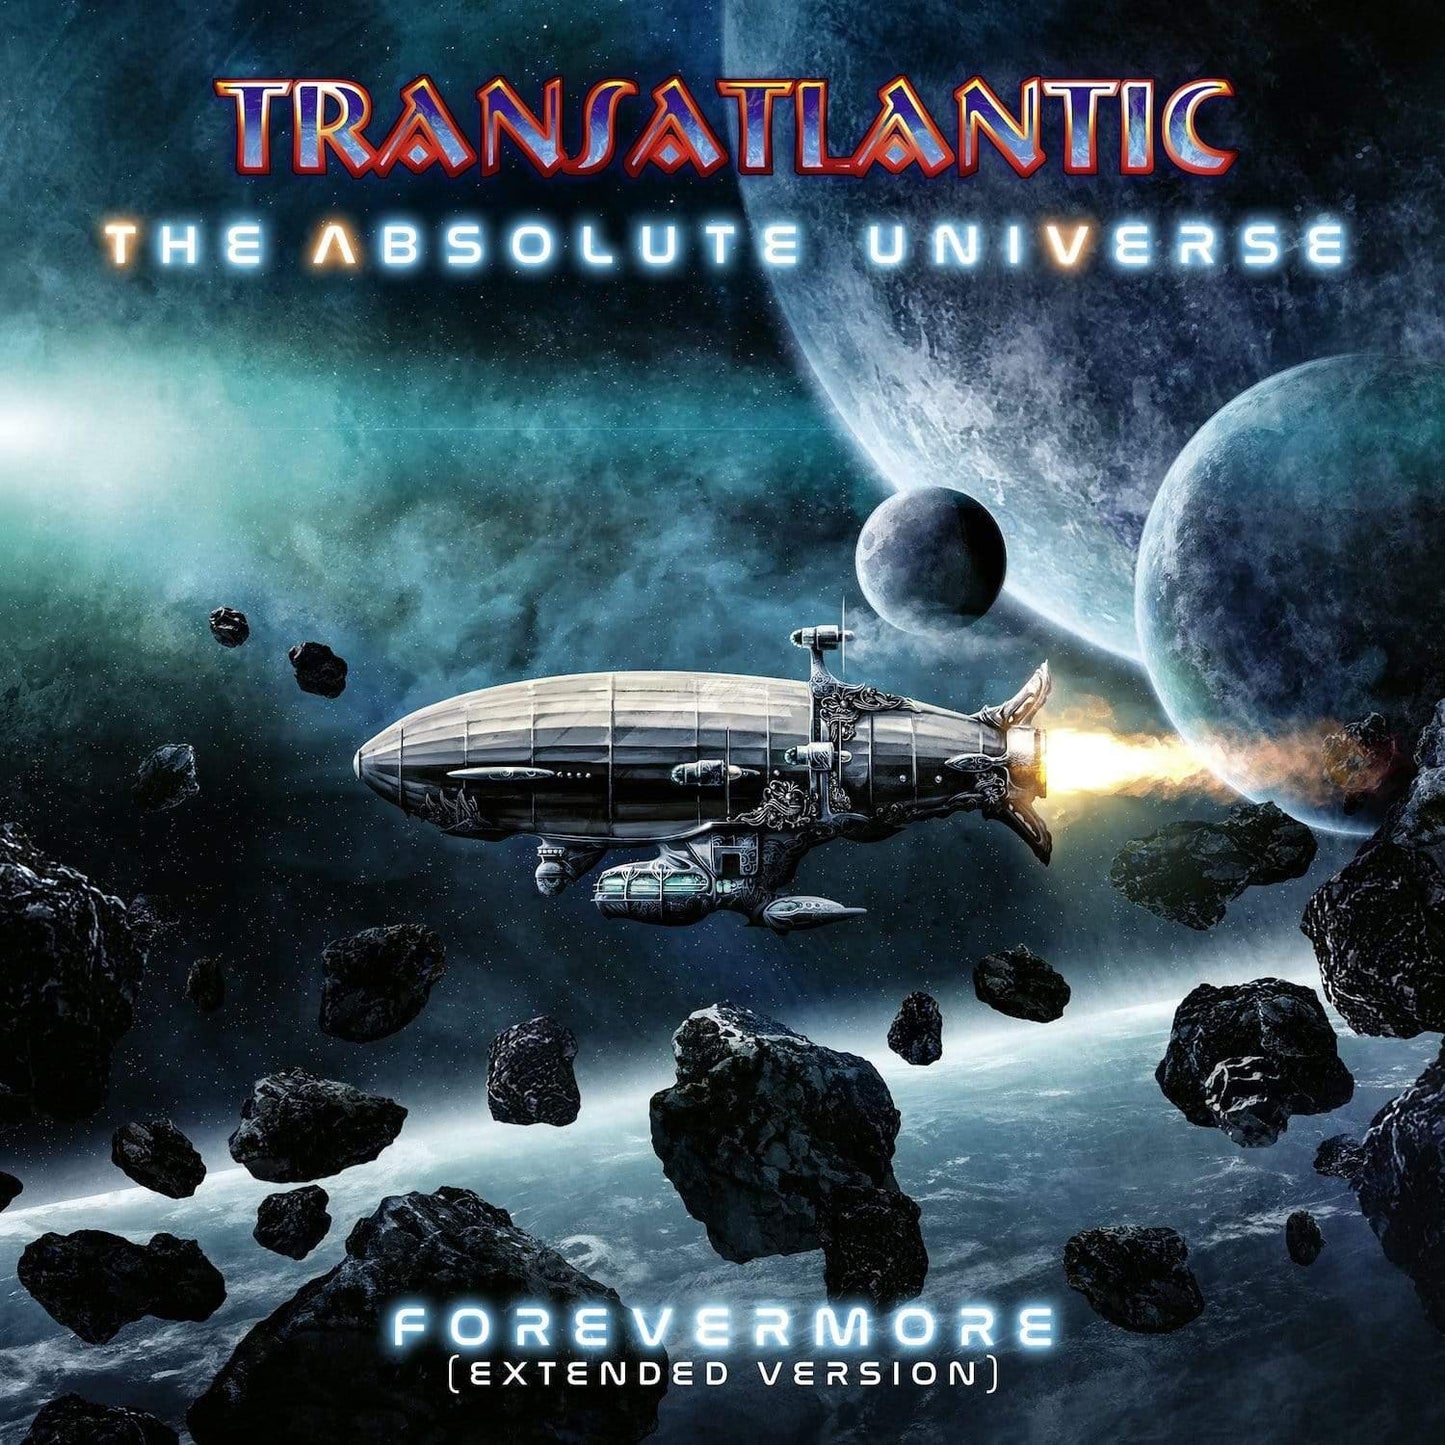 Transatlantic - The Absolute Universe: Forevermore (Extended Edition; Indie/Mt Exclusive) (Vinyl) - Joco Records